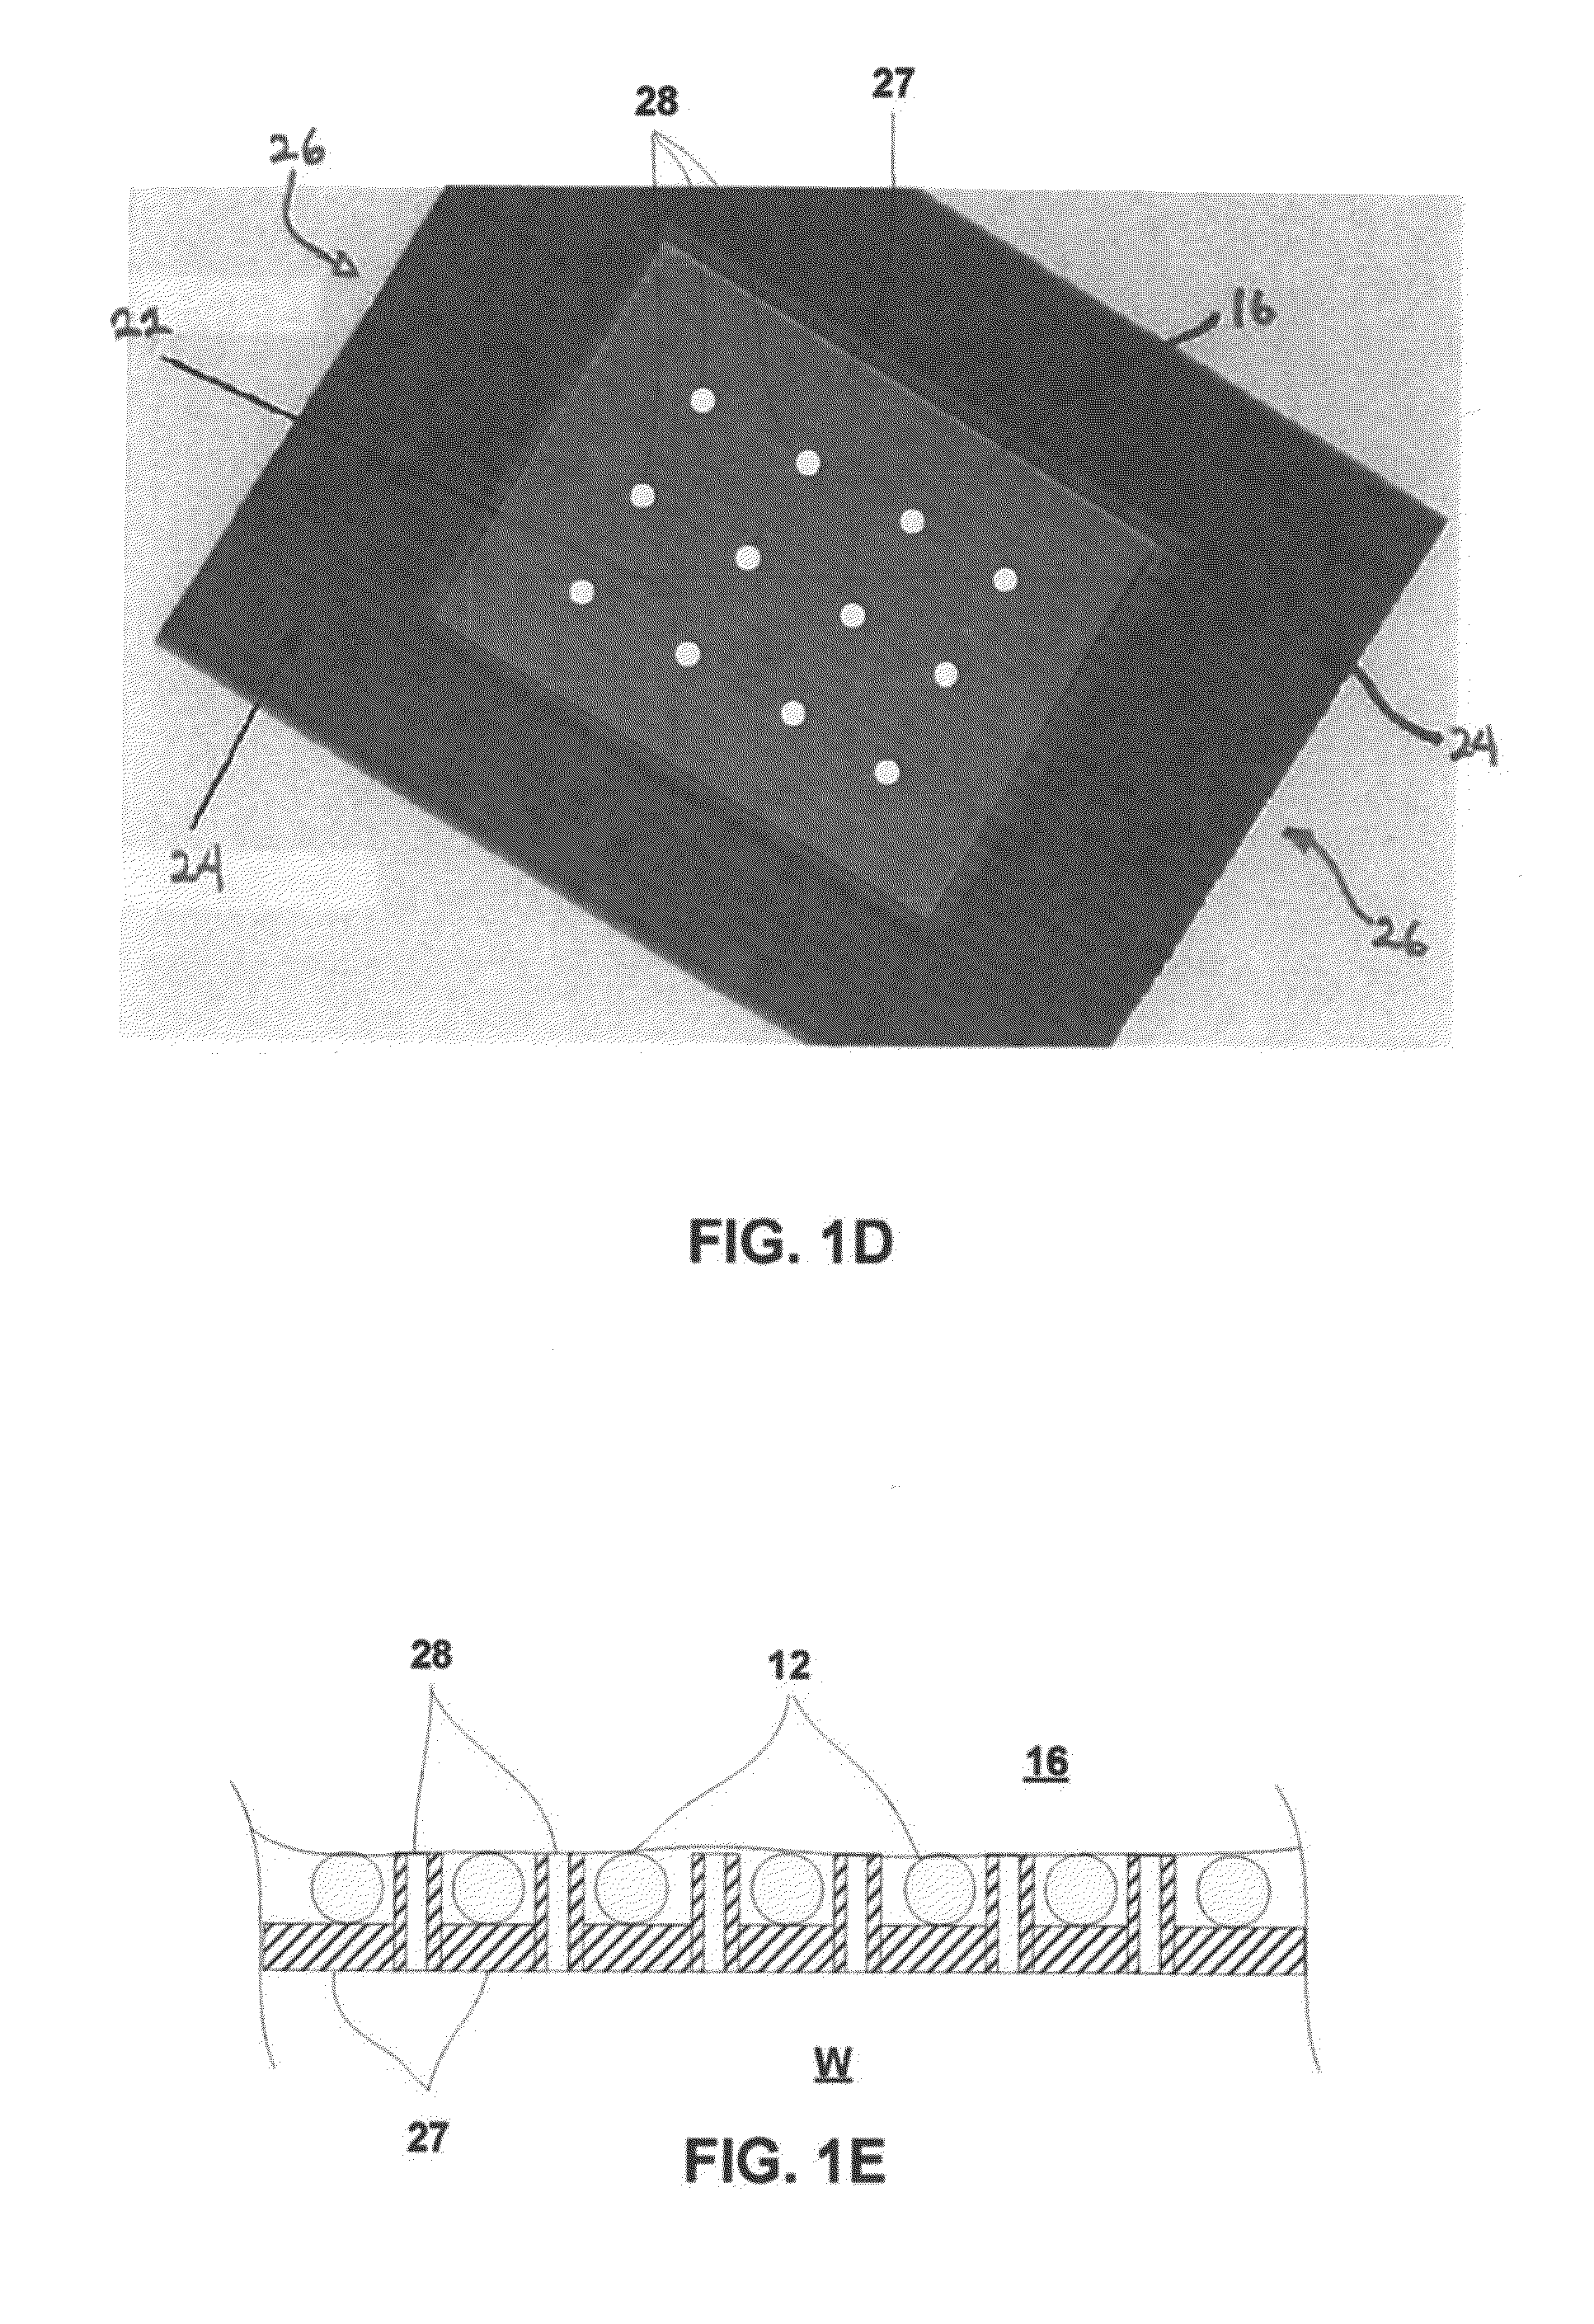 Oxygen diffusive wound dressings and methods of manufacturing and use